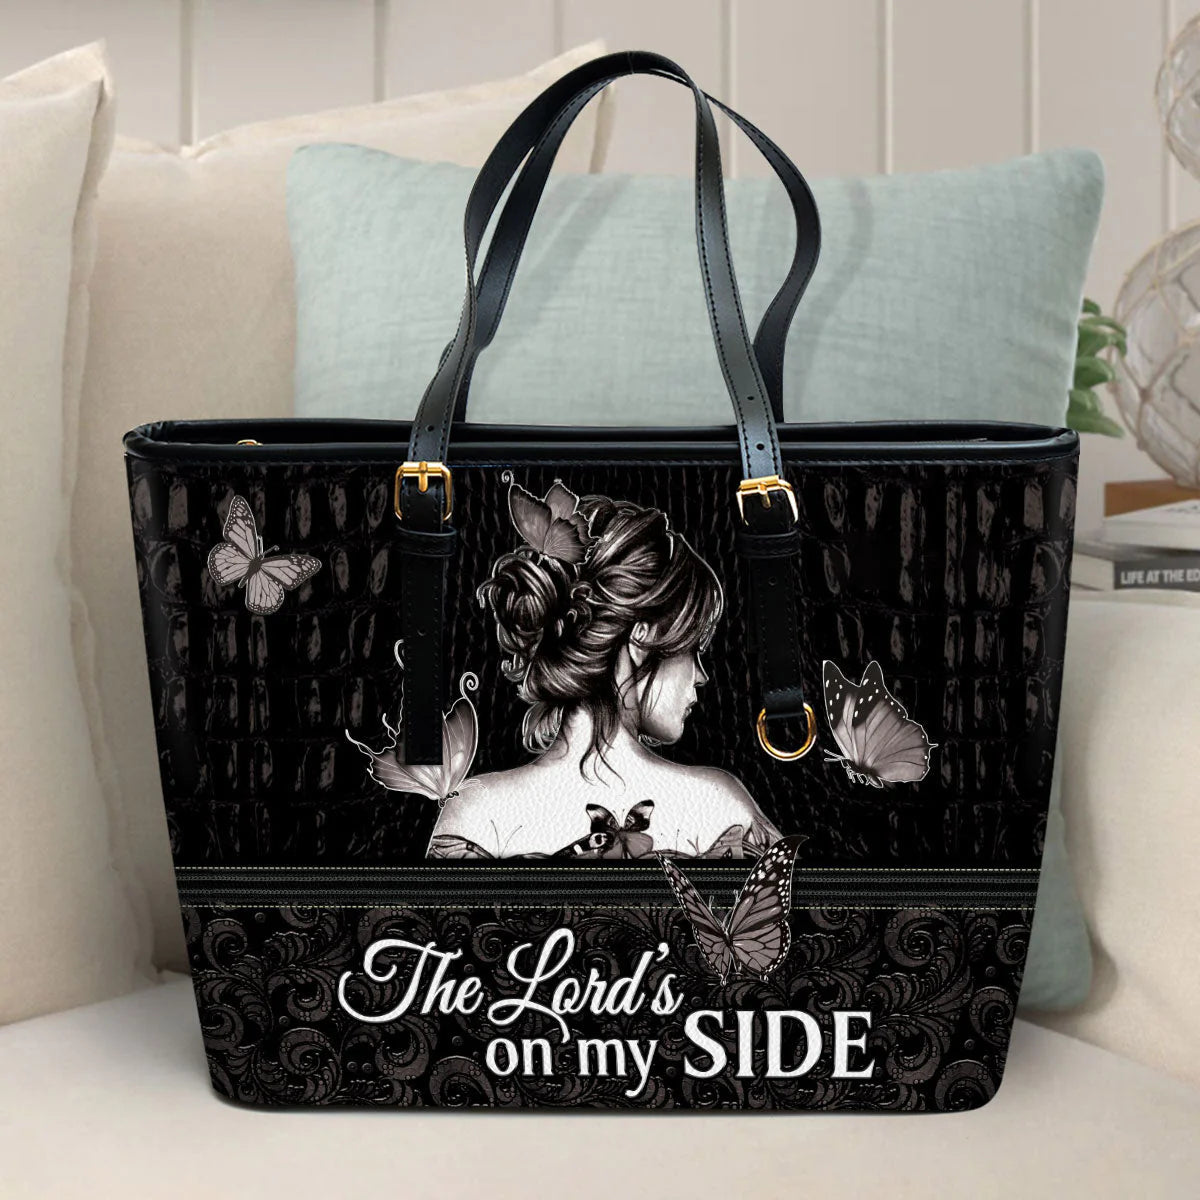 Christianartbag Handbag, The Lord‘s On My Side Butterfly, Personalized Gifts, Gifts for Women, Christmas Gift. - Christian Art Bag